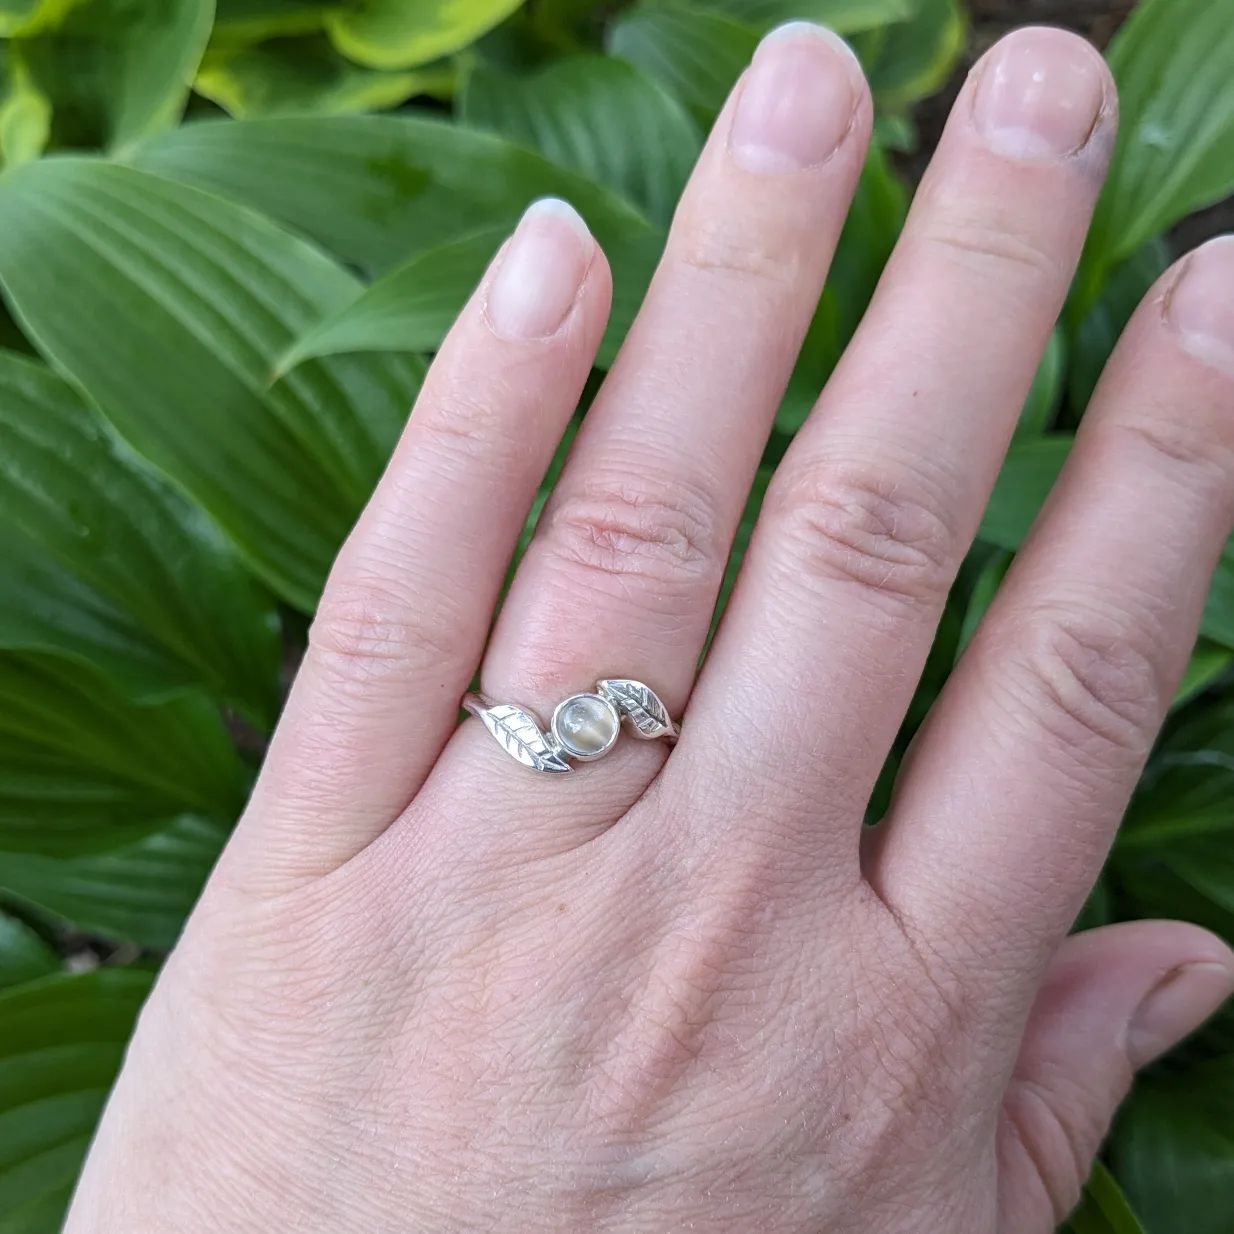 I am so excited to announce that I have been selected to participate in the Toronto outdoor art fair this July
 It's a really incredible show and I hope I can do it justice with my work. Can't wait to see you there. 
Here's my moonstone leaf ring for